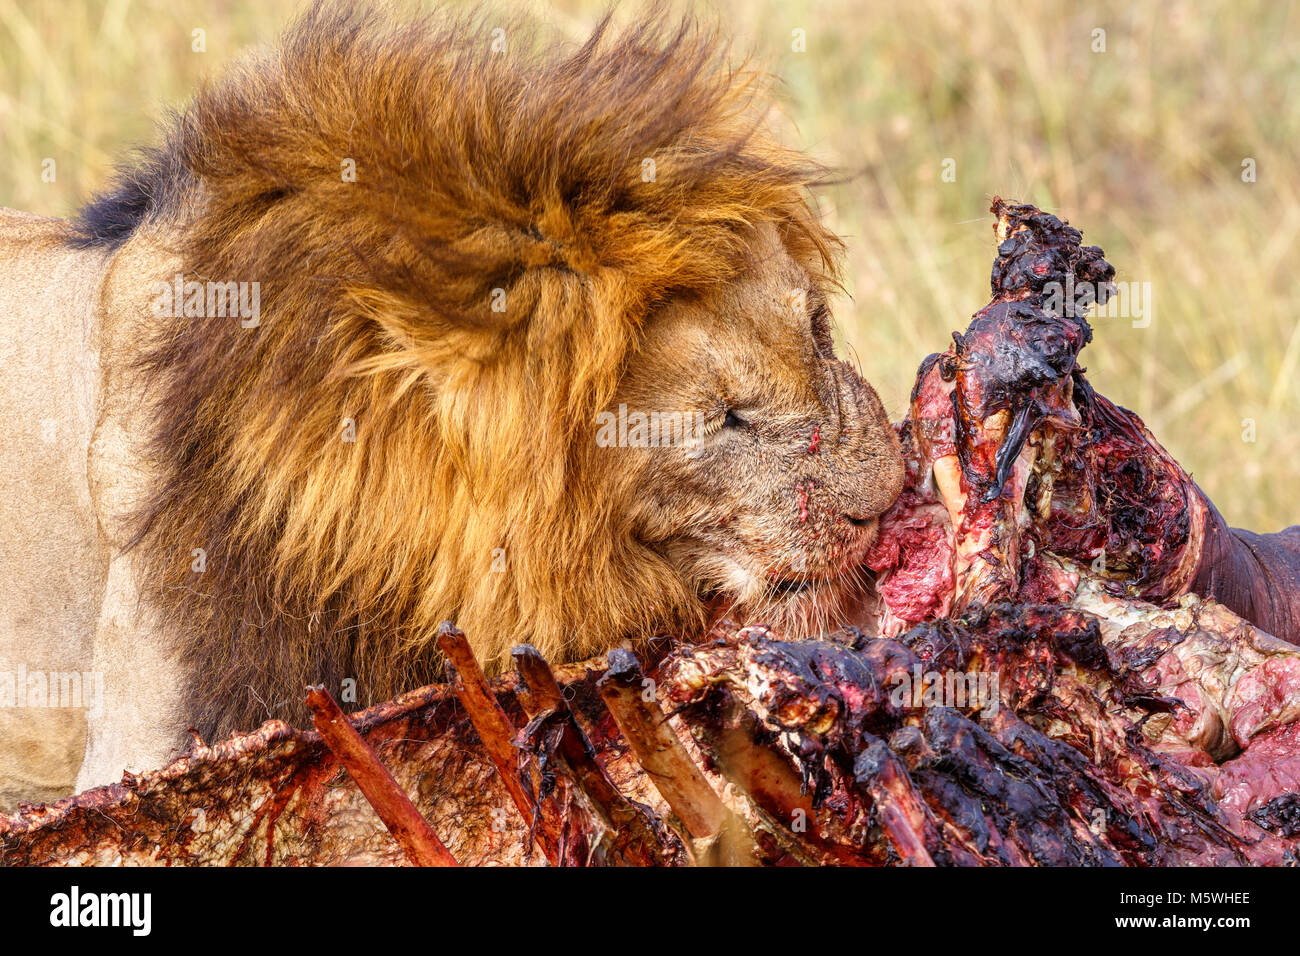 Male Lion eating meat from a dead animal Stock Photo - Alamy